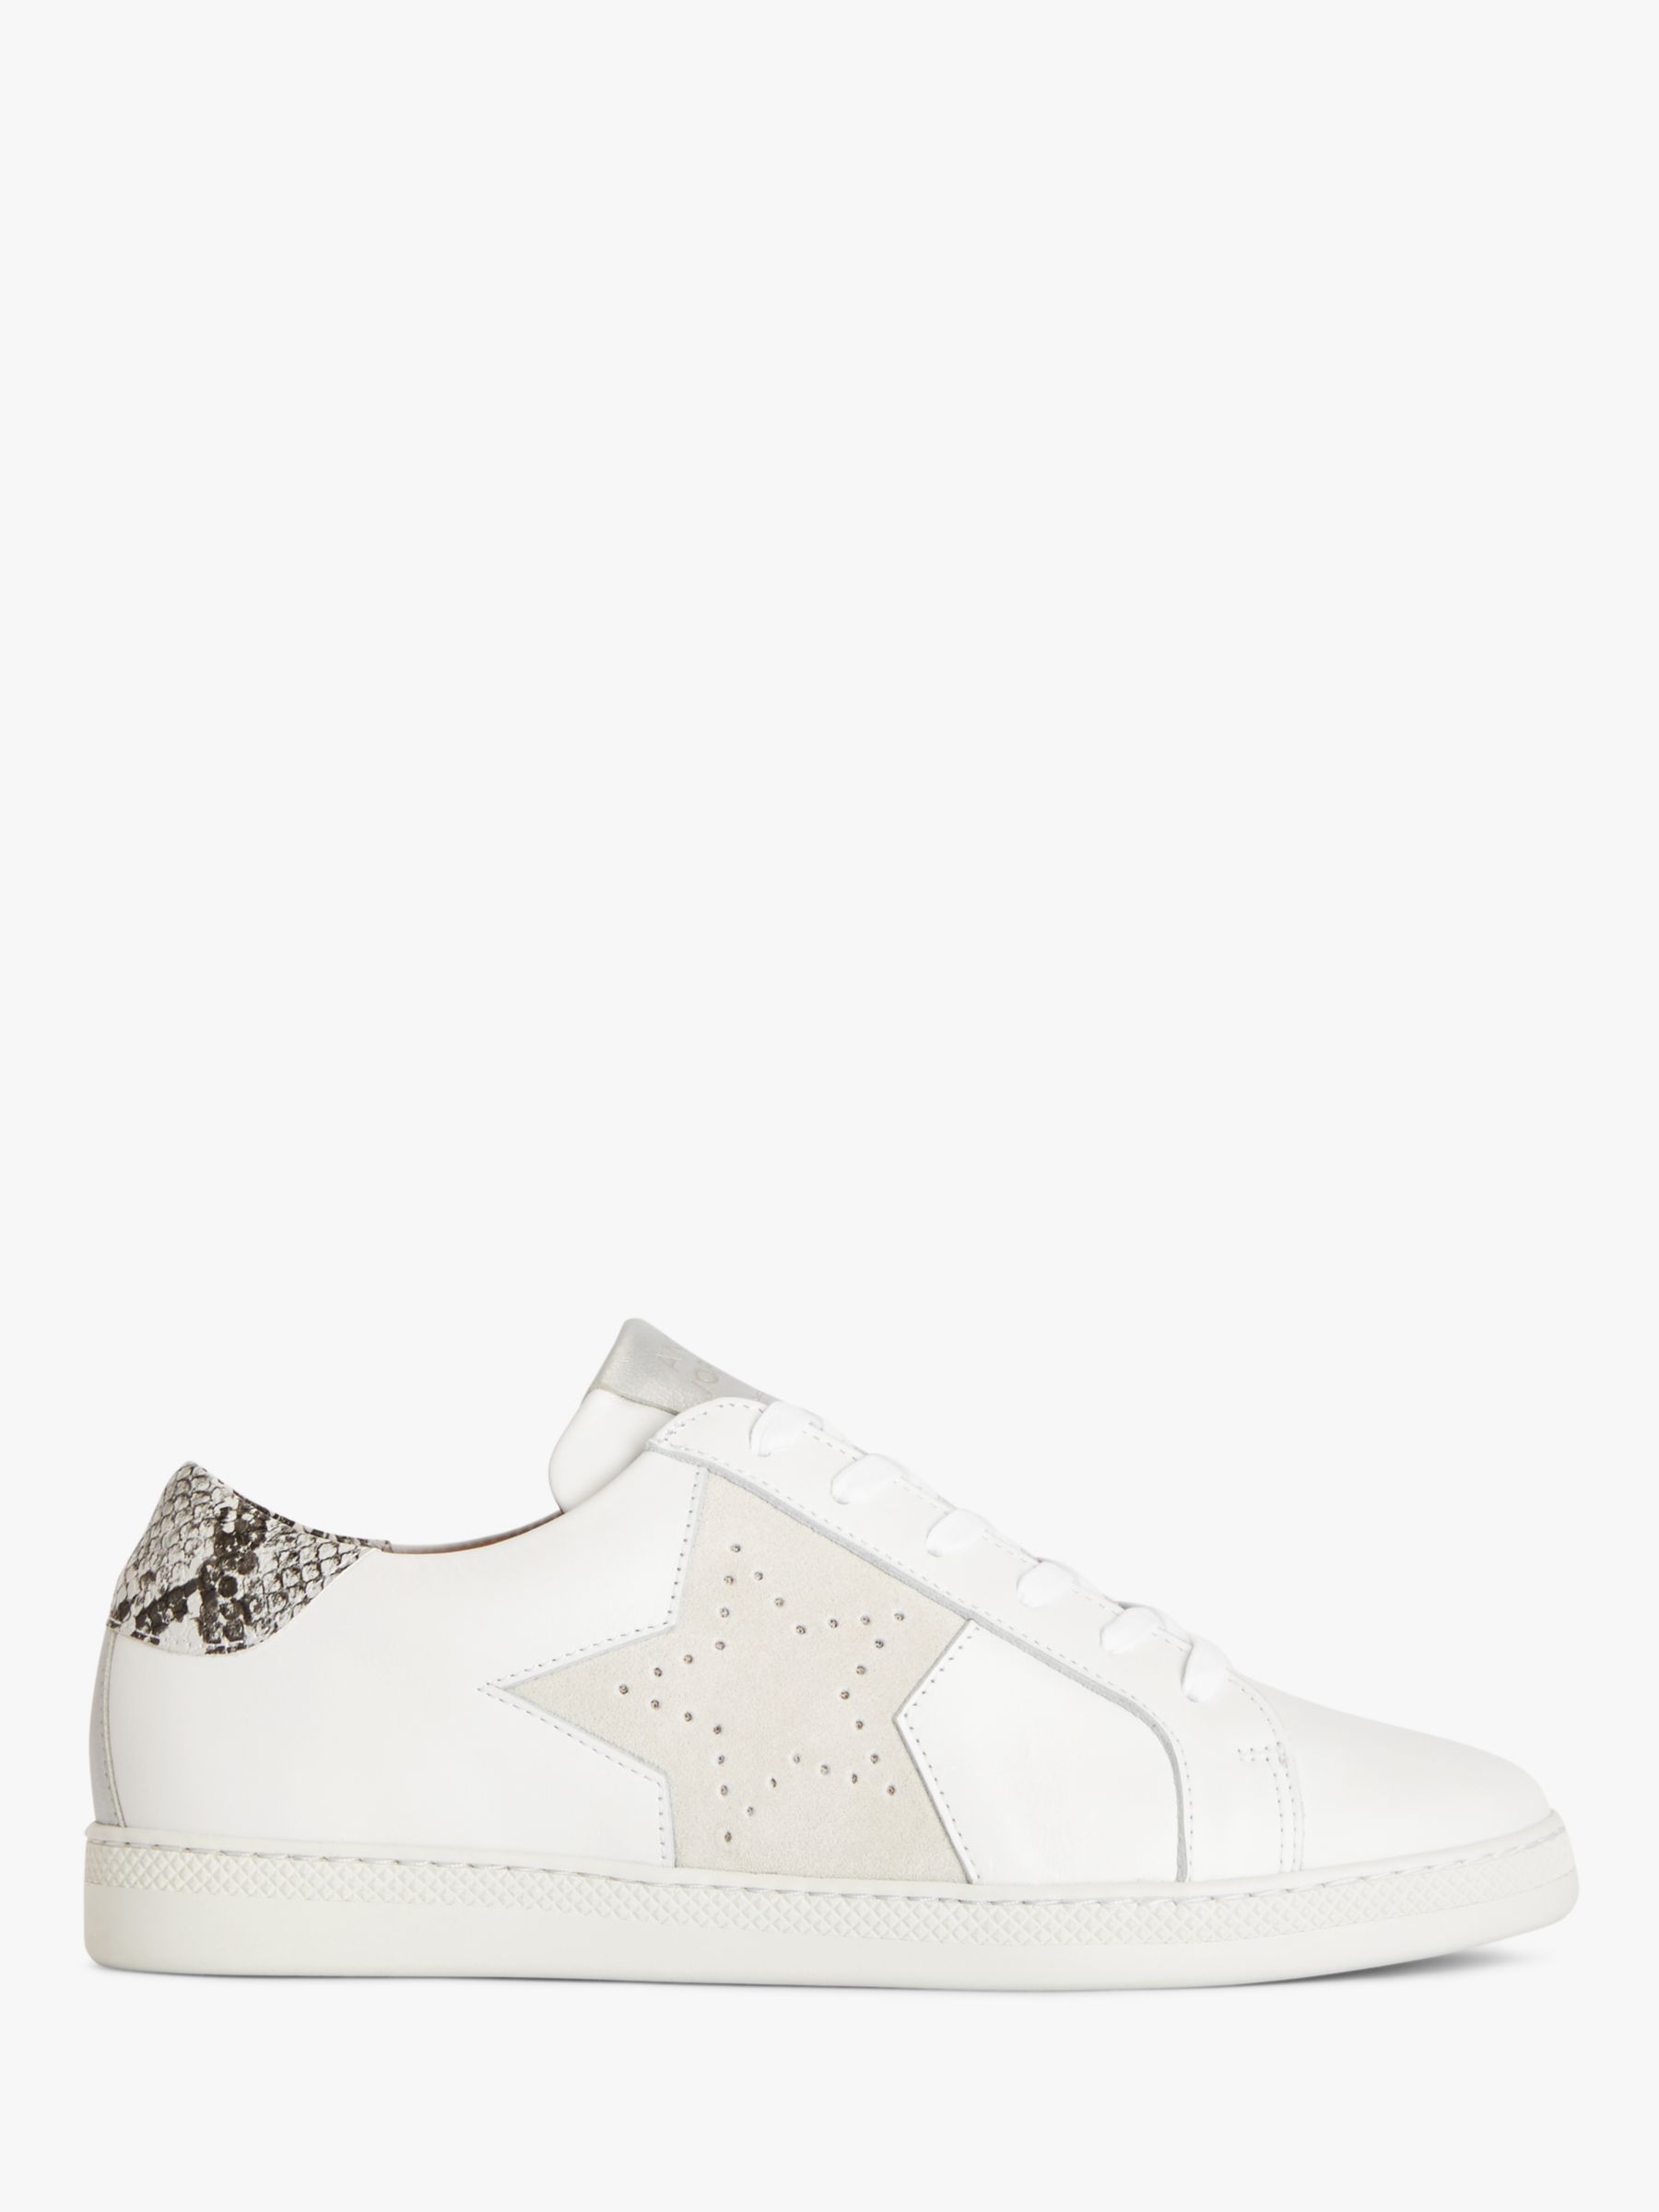 AND/OR Estar Leather Star Detail Trainers, White/Multi at John Lewis ...